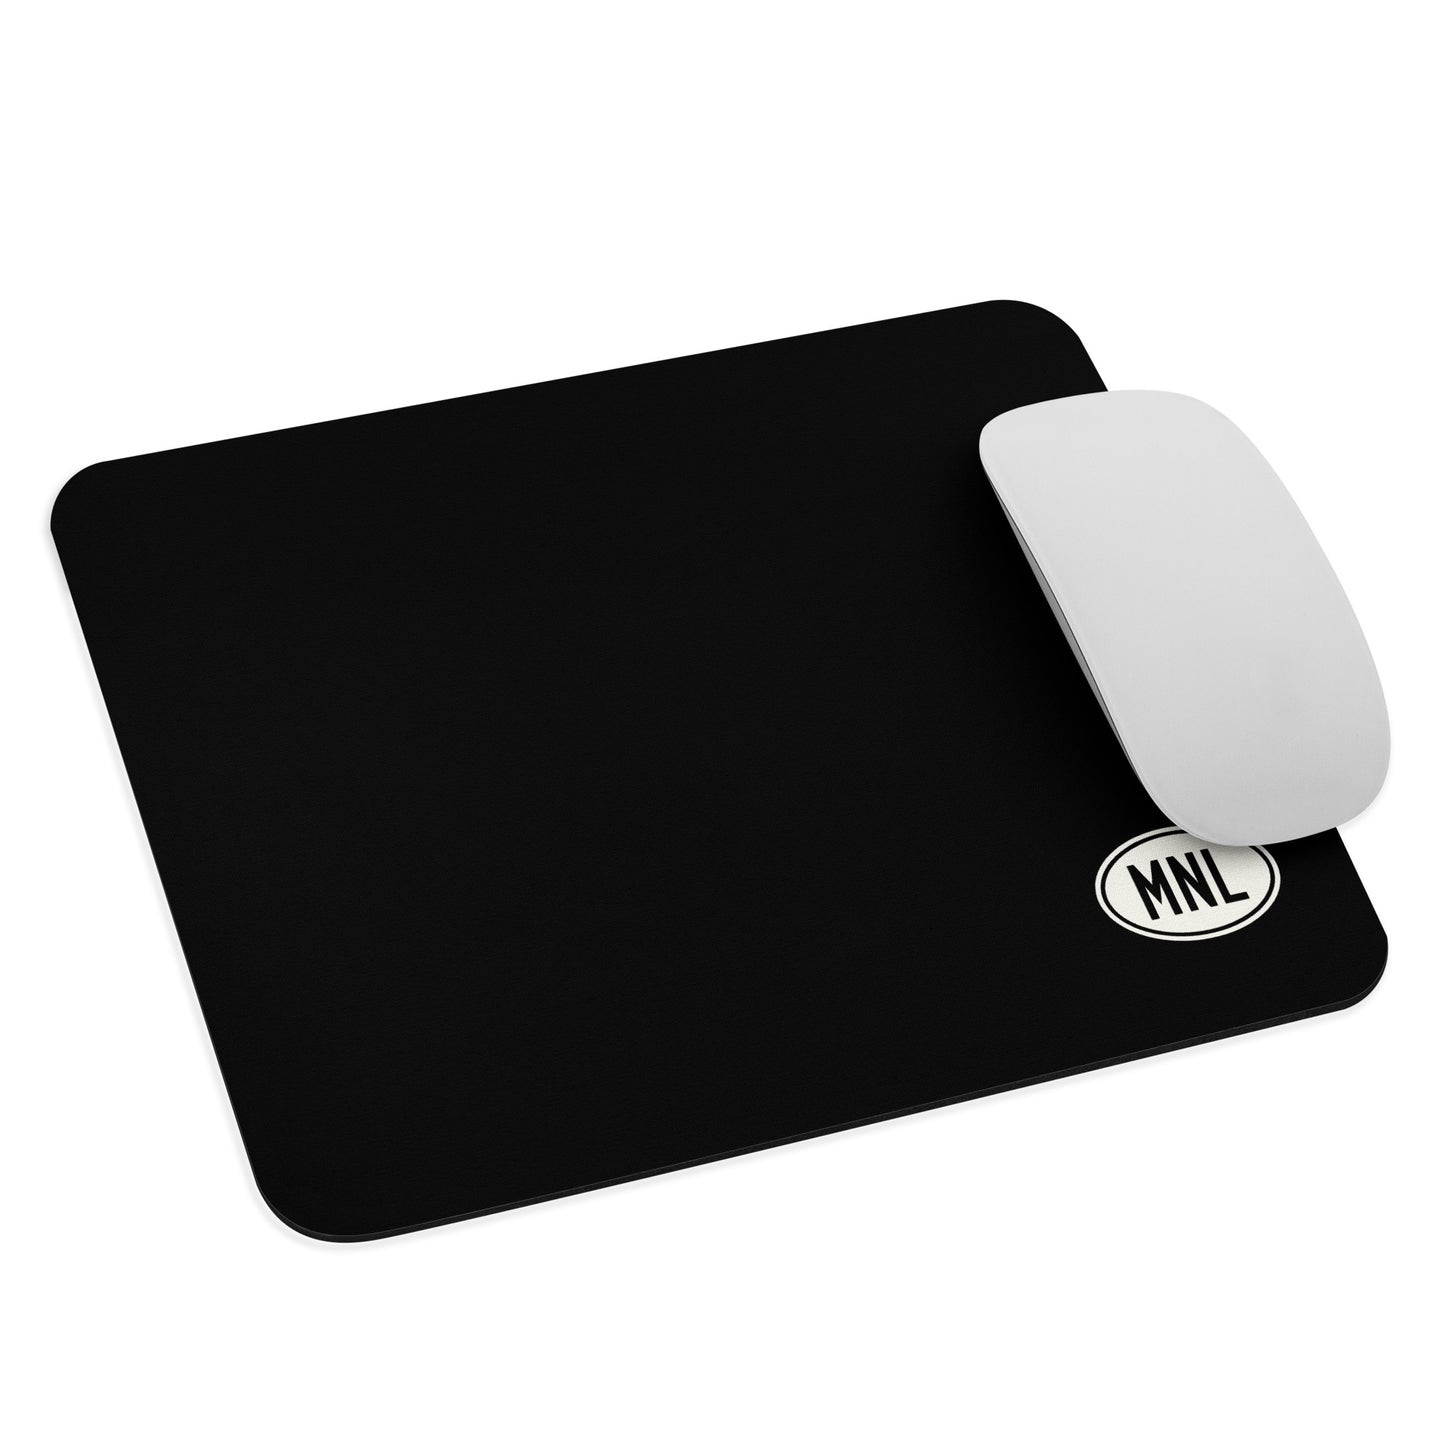 Unique Travel Gift Mouse Pad - White Oval • MNL Manila • YHM Designs - Image 03